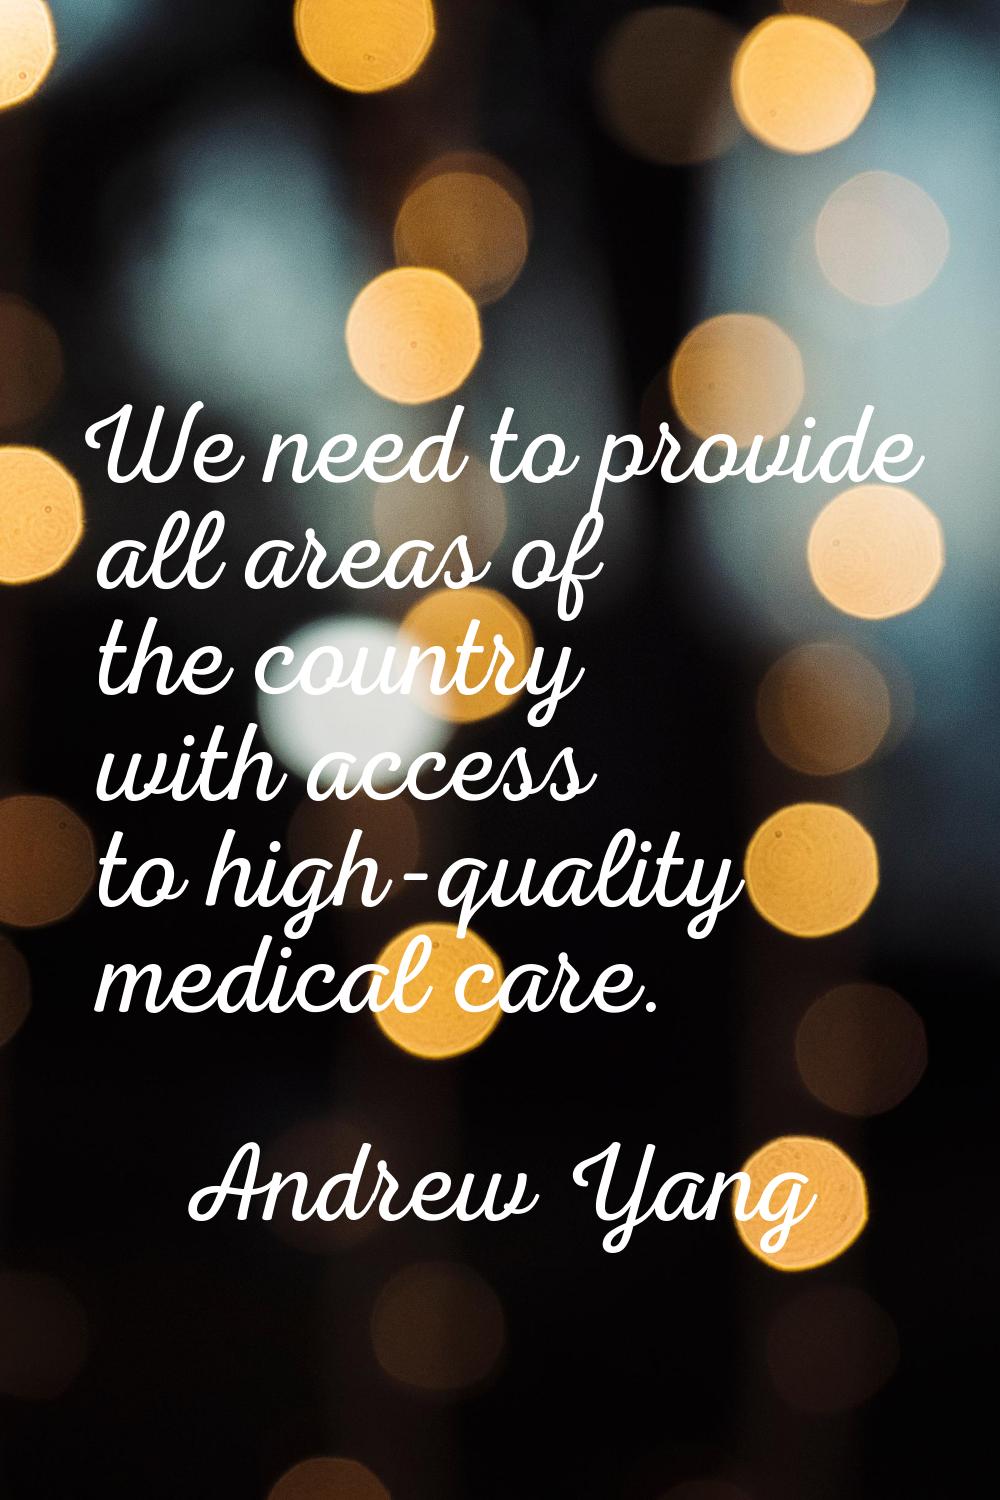 We need to provide all areas of the country with access to high-quality medical care.